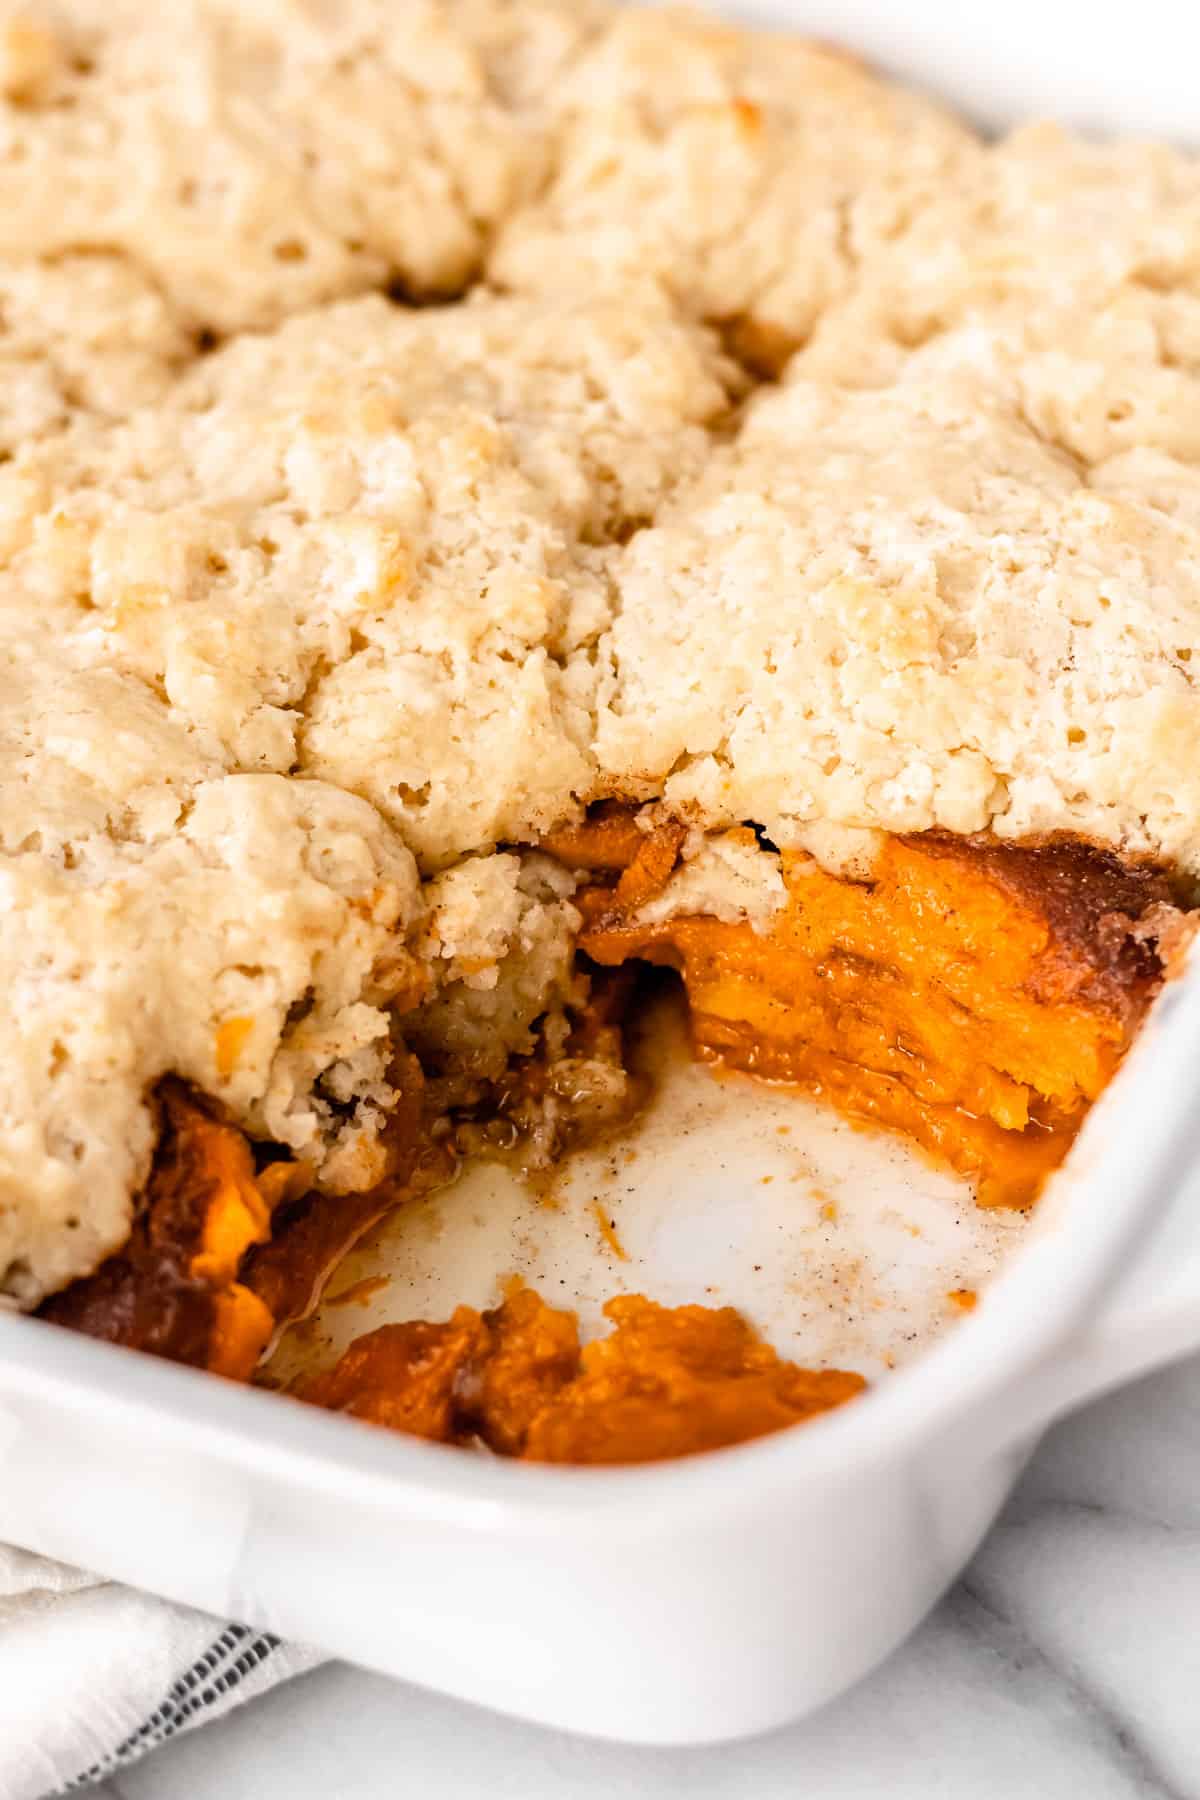 A sweet potato cobbler in a baking dish with a serving removed showing the layers of sweet potatoes inside.